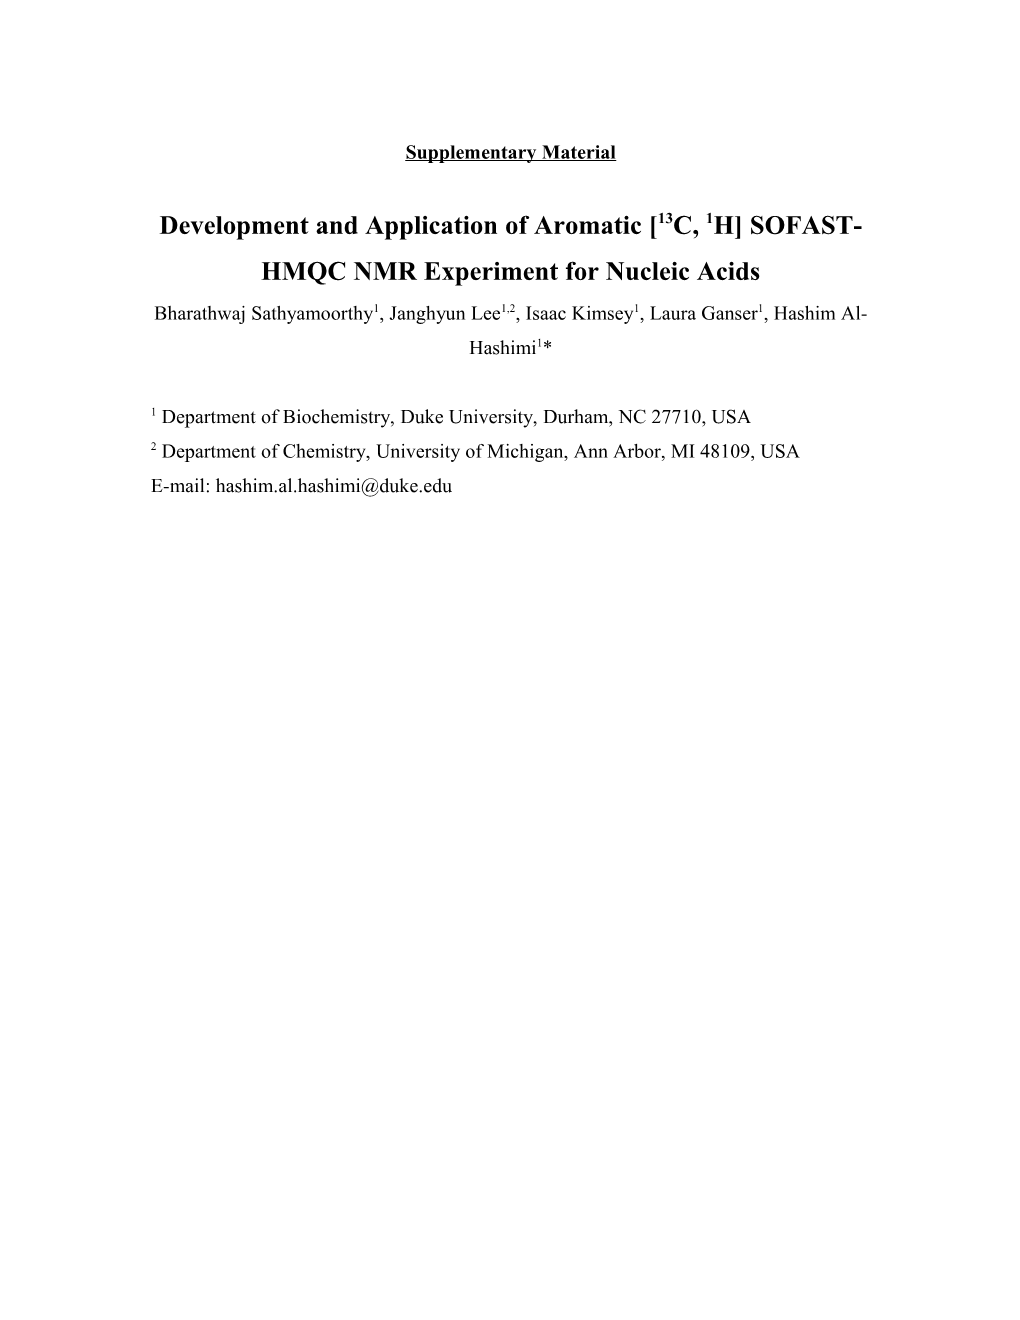 Development and Application of Aromatic 13C, 1H SOFAST-HMQC NMR Experiment for Nucleic Acids